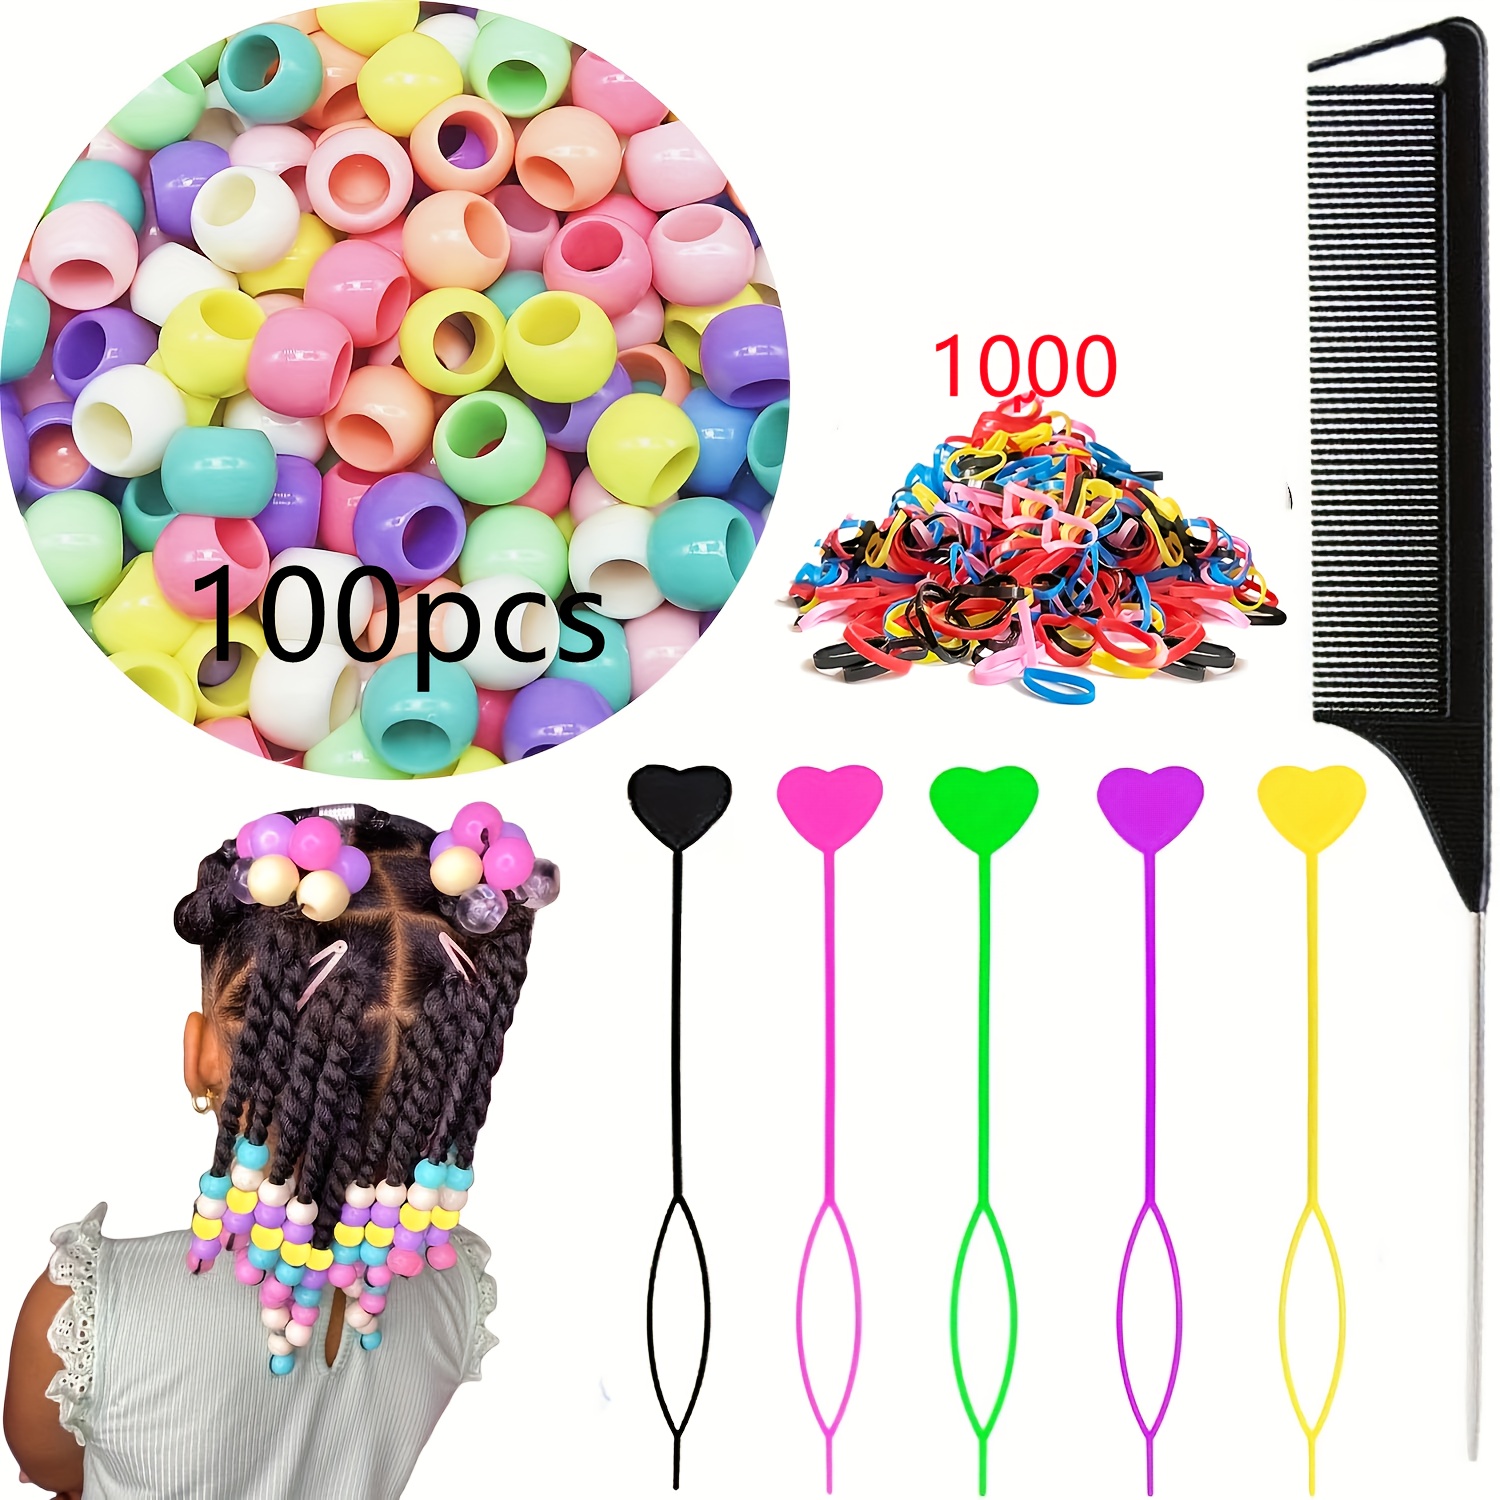  406Pcs Hair Beads Set for Girls Hair Braids Including 200Pcs  10x12mm Rainbow Hair Beads 200Pcs Elastic Rubber Bands 1Pcs Rat Tail Comb  5Pcs Quick Beader Hair Beads for Girls and